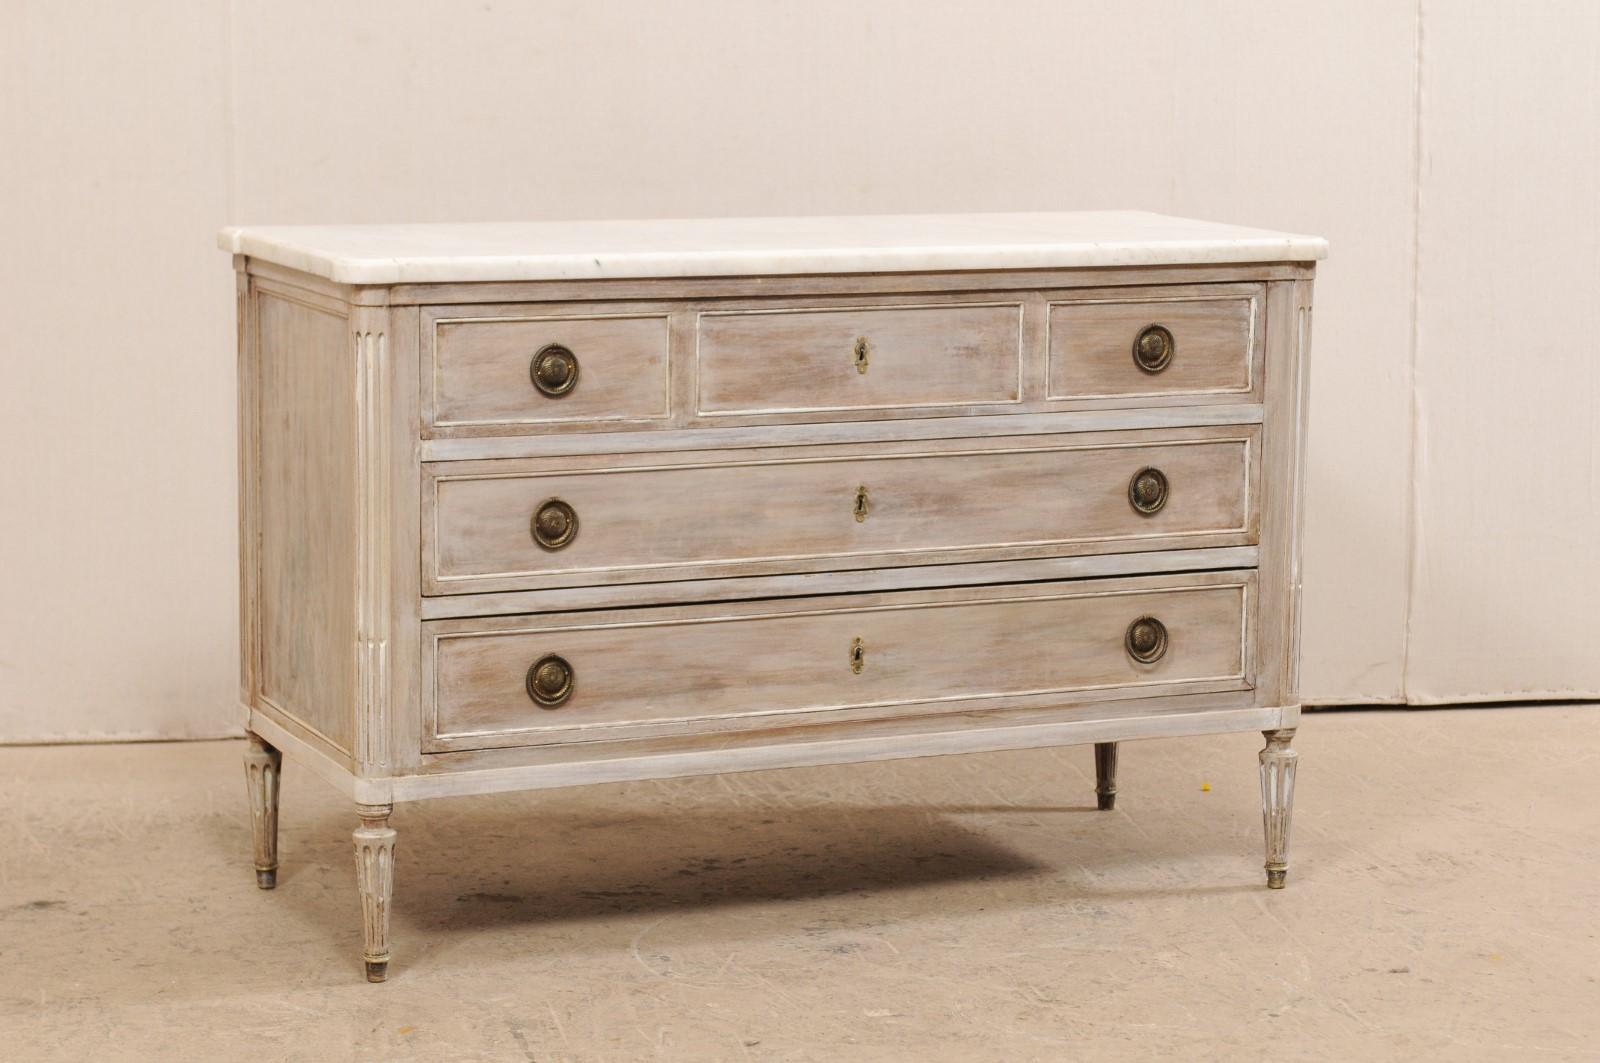 A French 19th century carved wood chest of drawers with marble top. This lovely Louis XVI style antique chest from France features a marble top with rounded, pronounced semi-circular edges at both front corners, atop a case of three full-sized